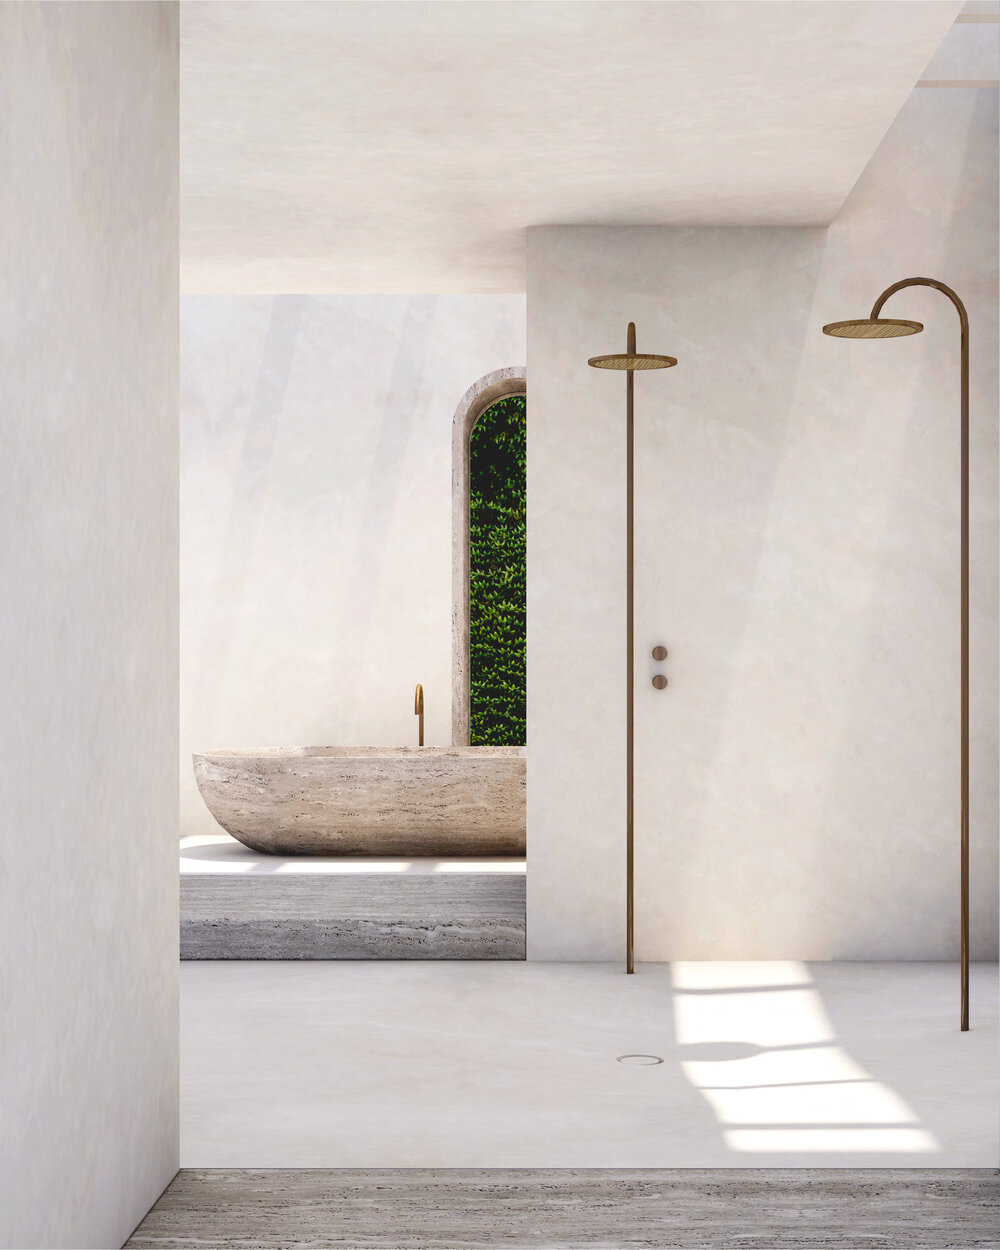 A dream home with gentle curves of lime plaster and travertine